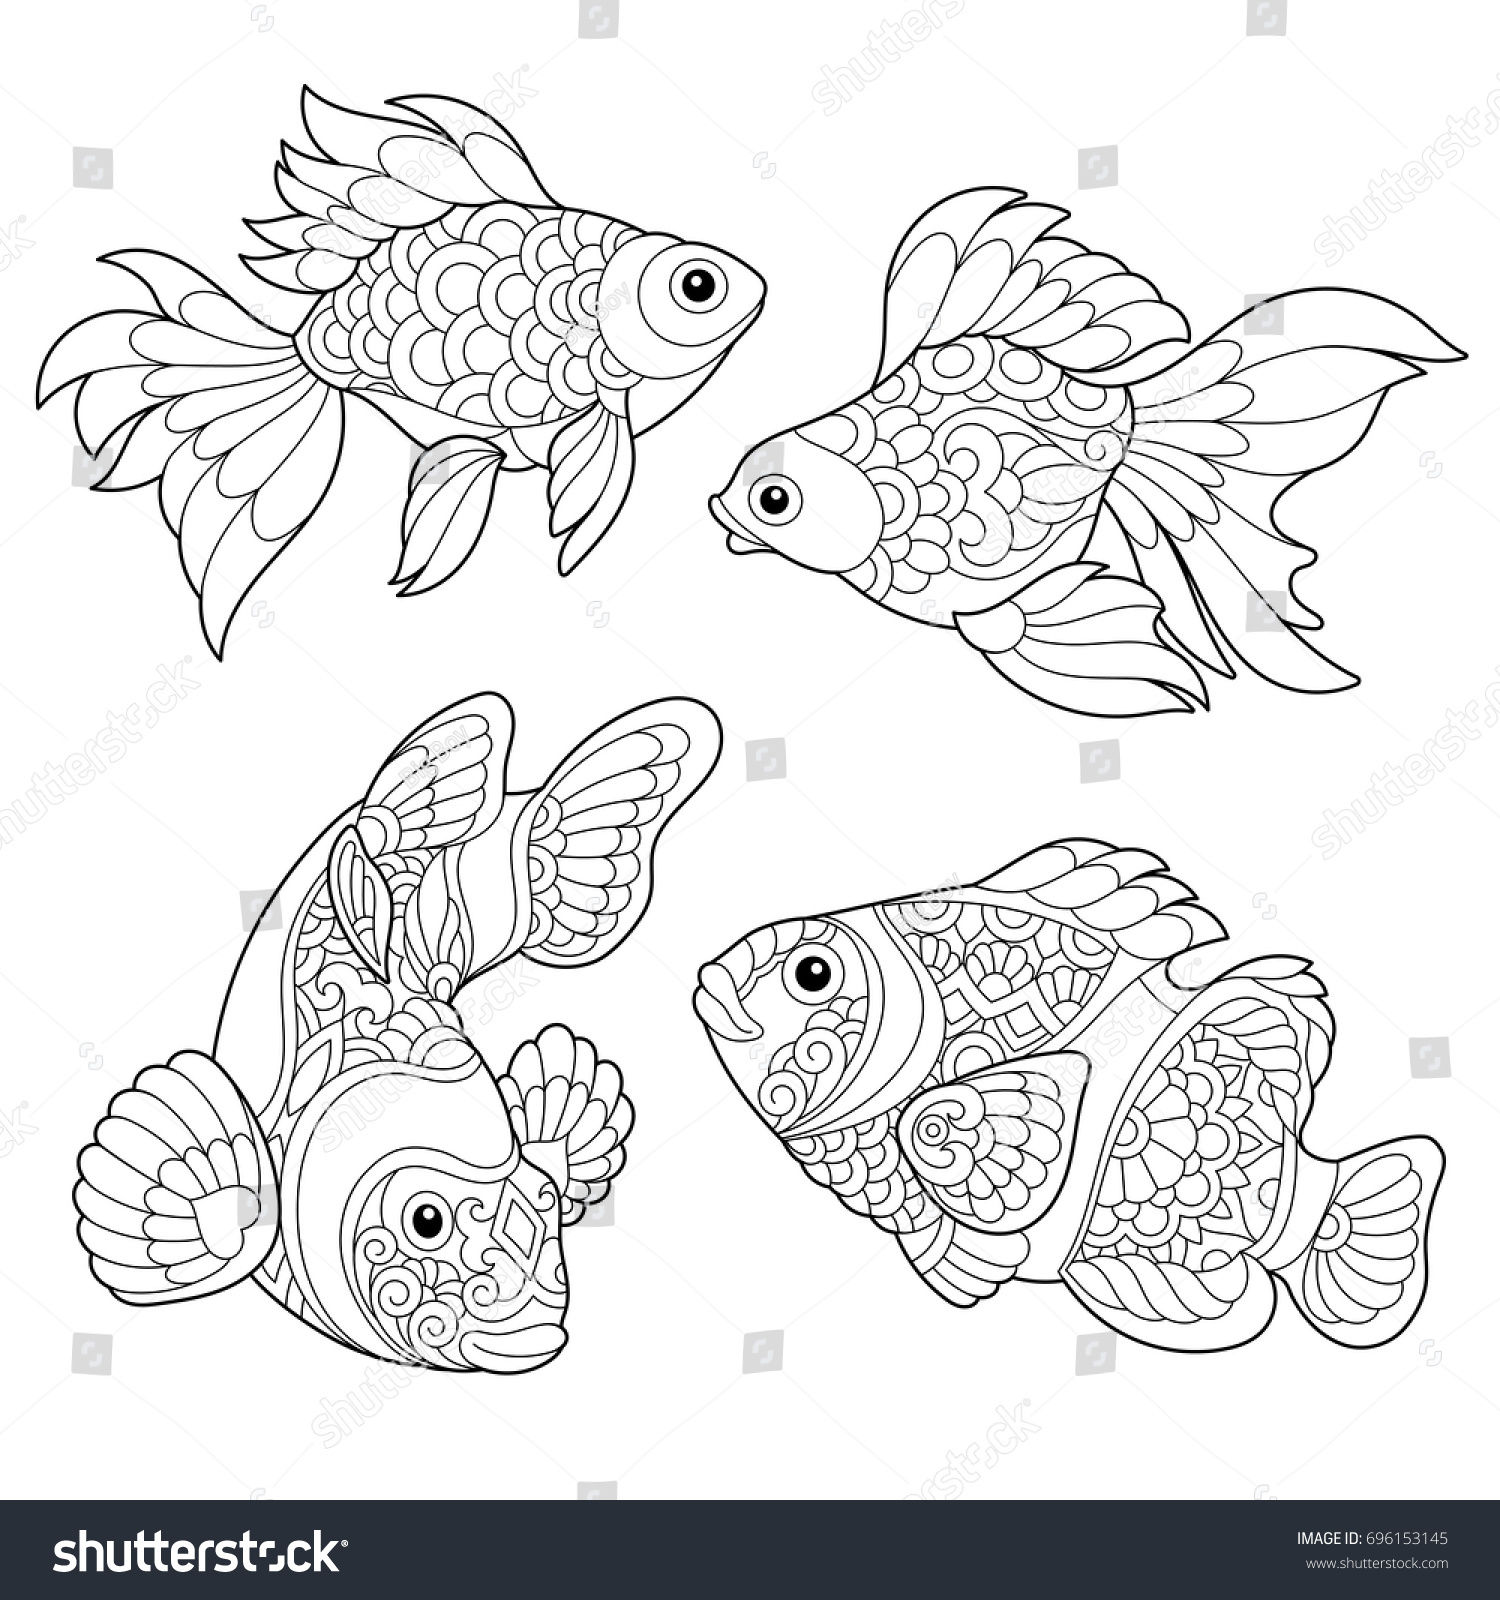 Coloring Page Goldfish Clown Fish Freehand Stock Vector 696153145